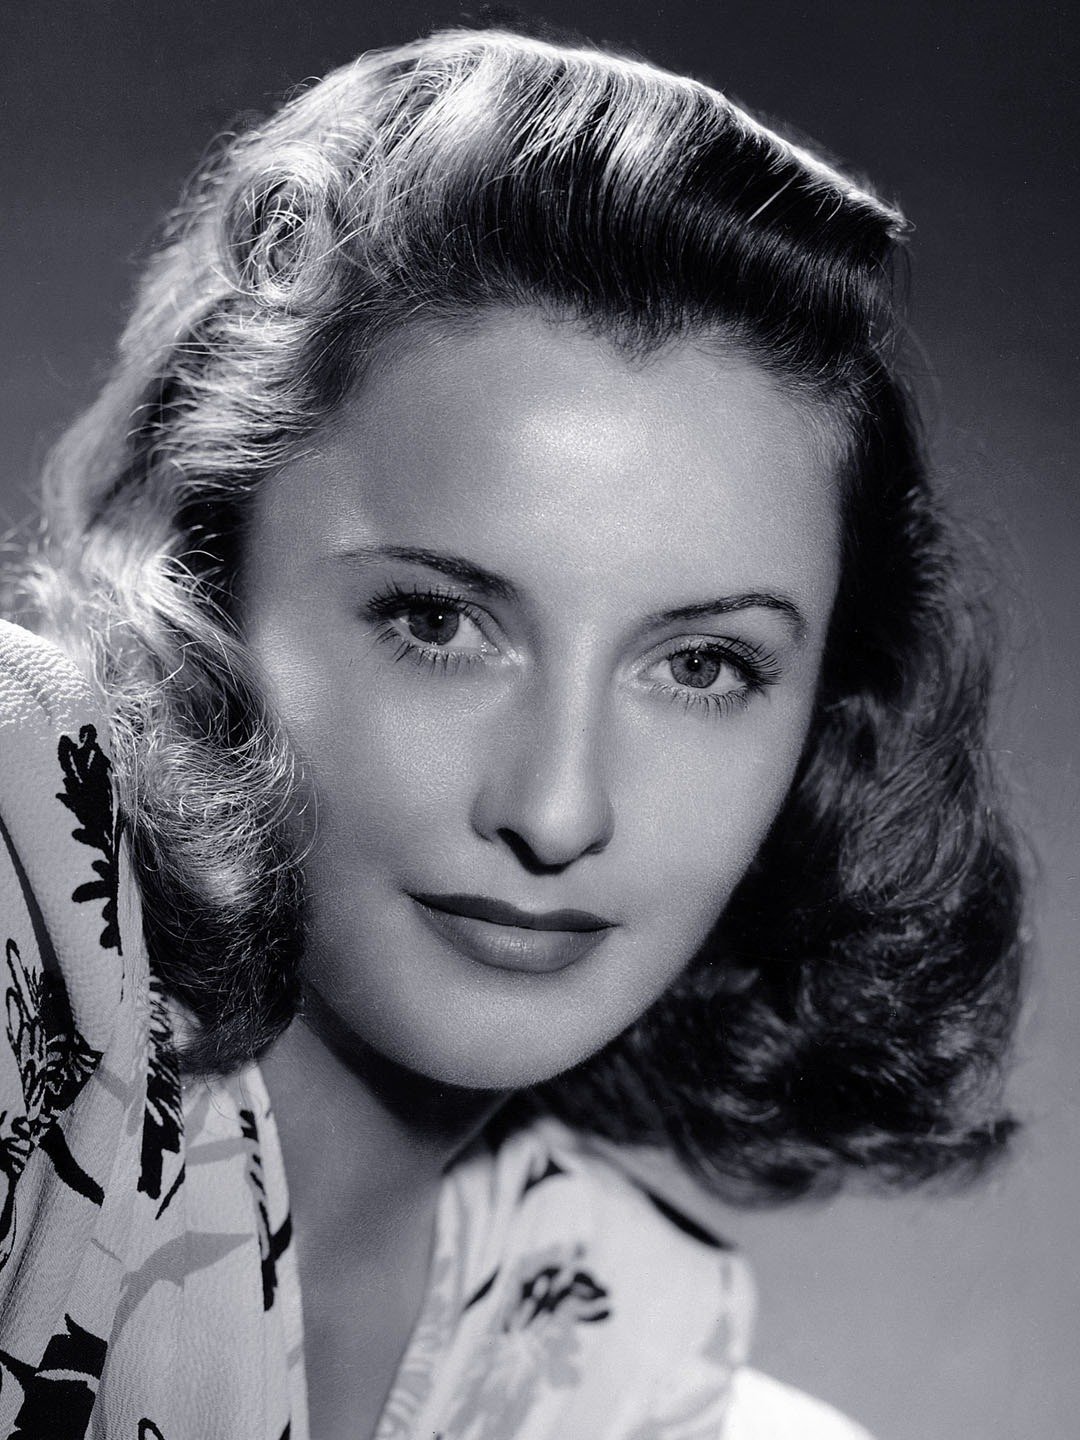 How tall is Barbara Stanwyck?